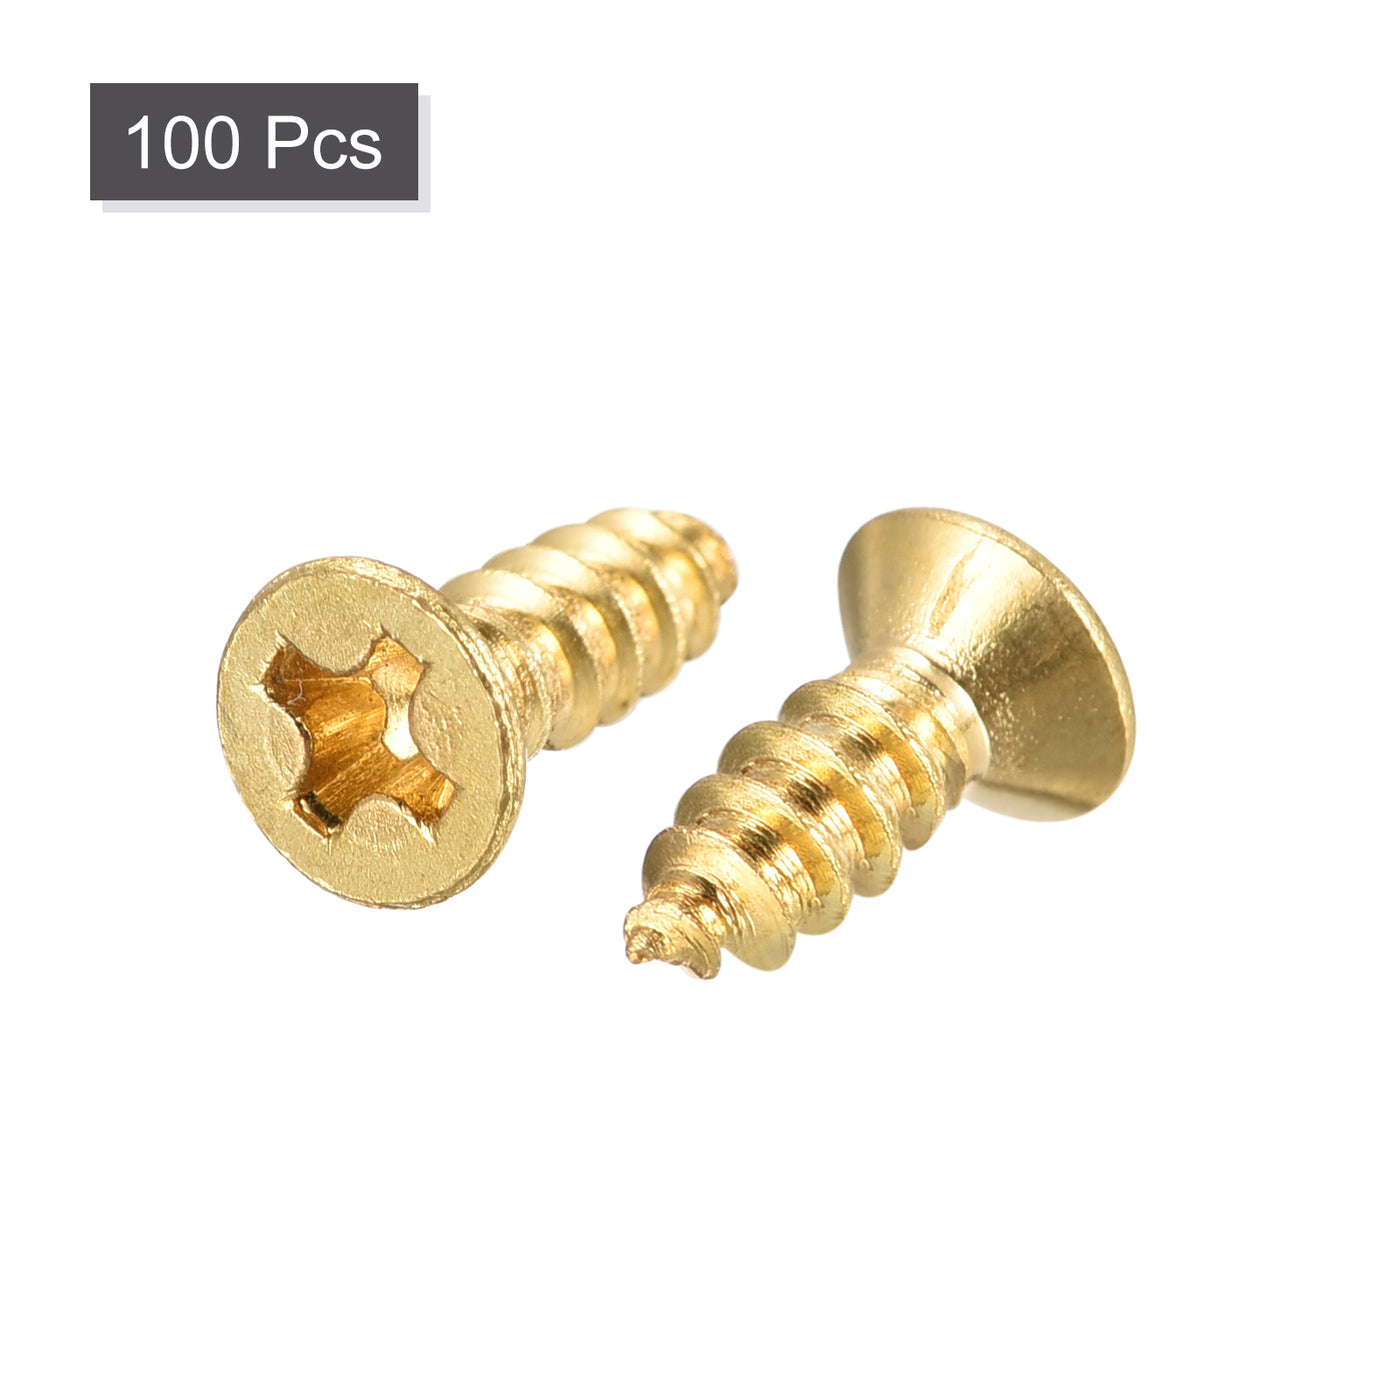 uxcell Uxcell Brass Wood Screws, M3.5x12mm Phillips Flat Head Self Tapping Connector for Door, Cabinet, Wooden Furniture 100Pcs